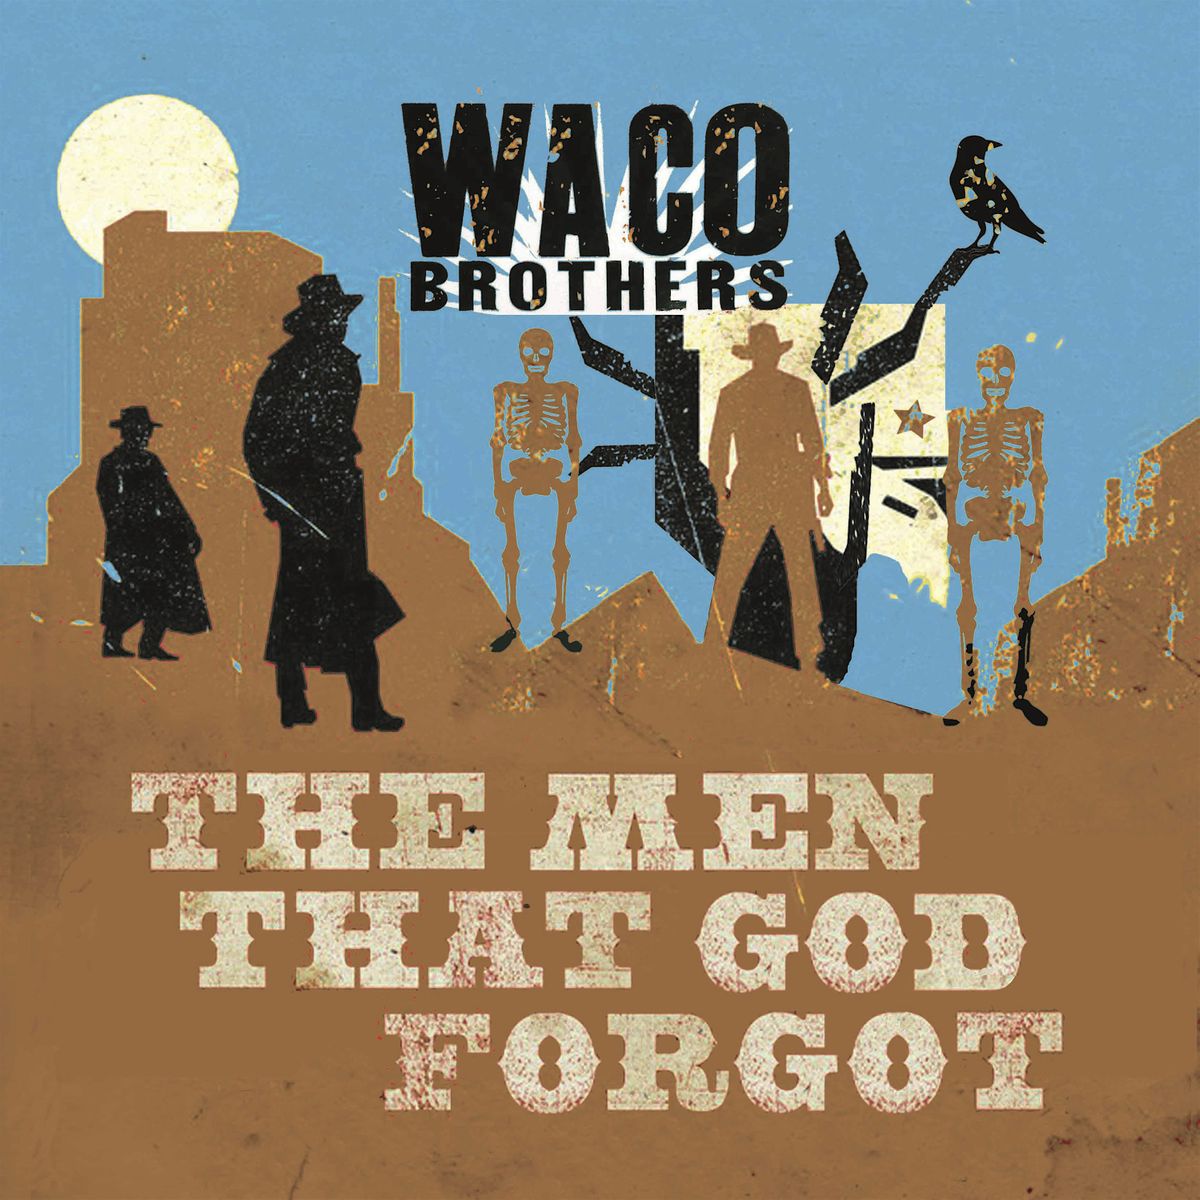 WACO BROTHERS with TBD special guest